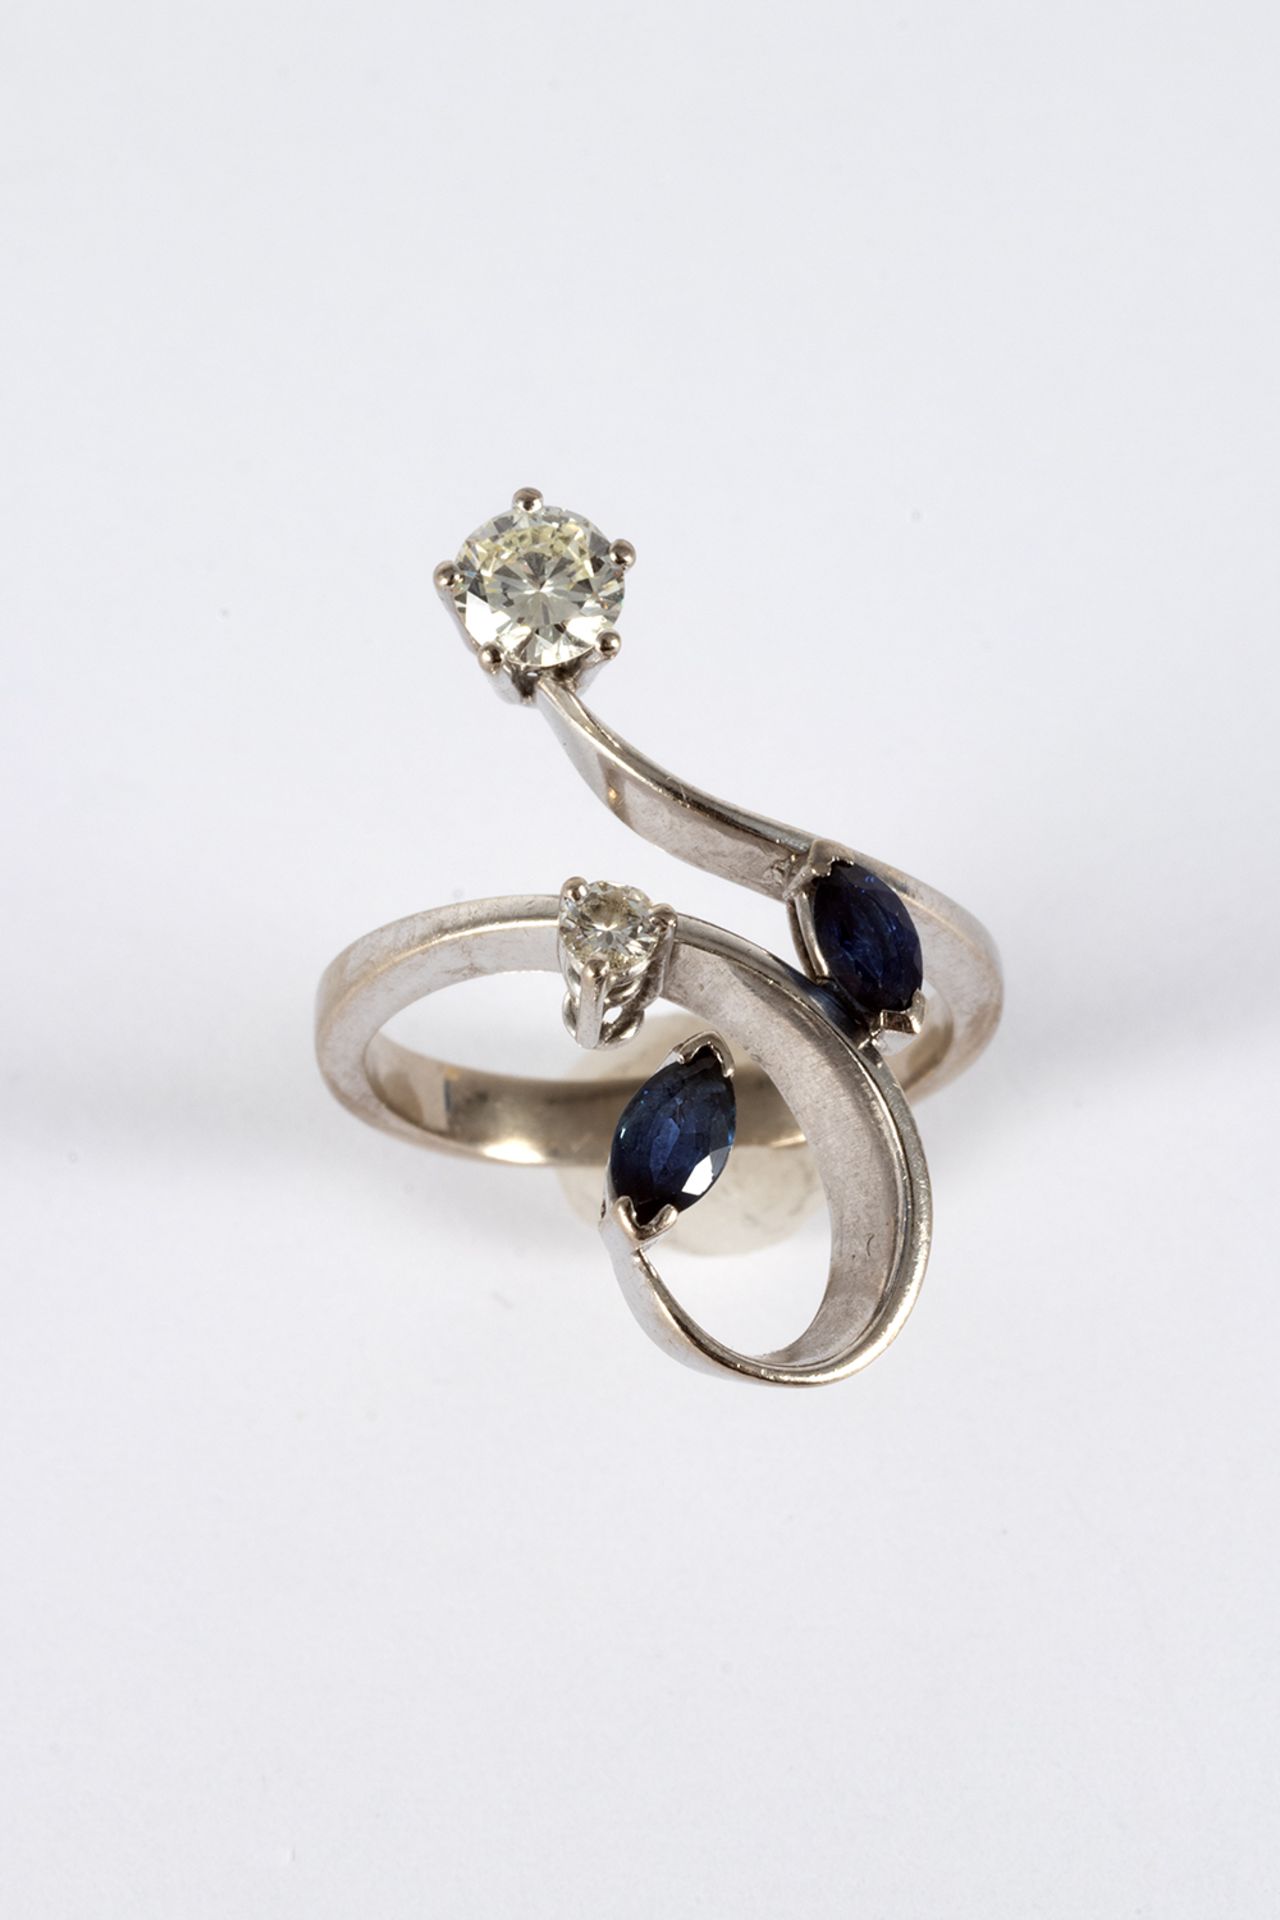 Ring in white gold, brilliant-cut diamonds and marquise-cut blue sapphires.